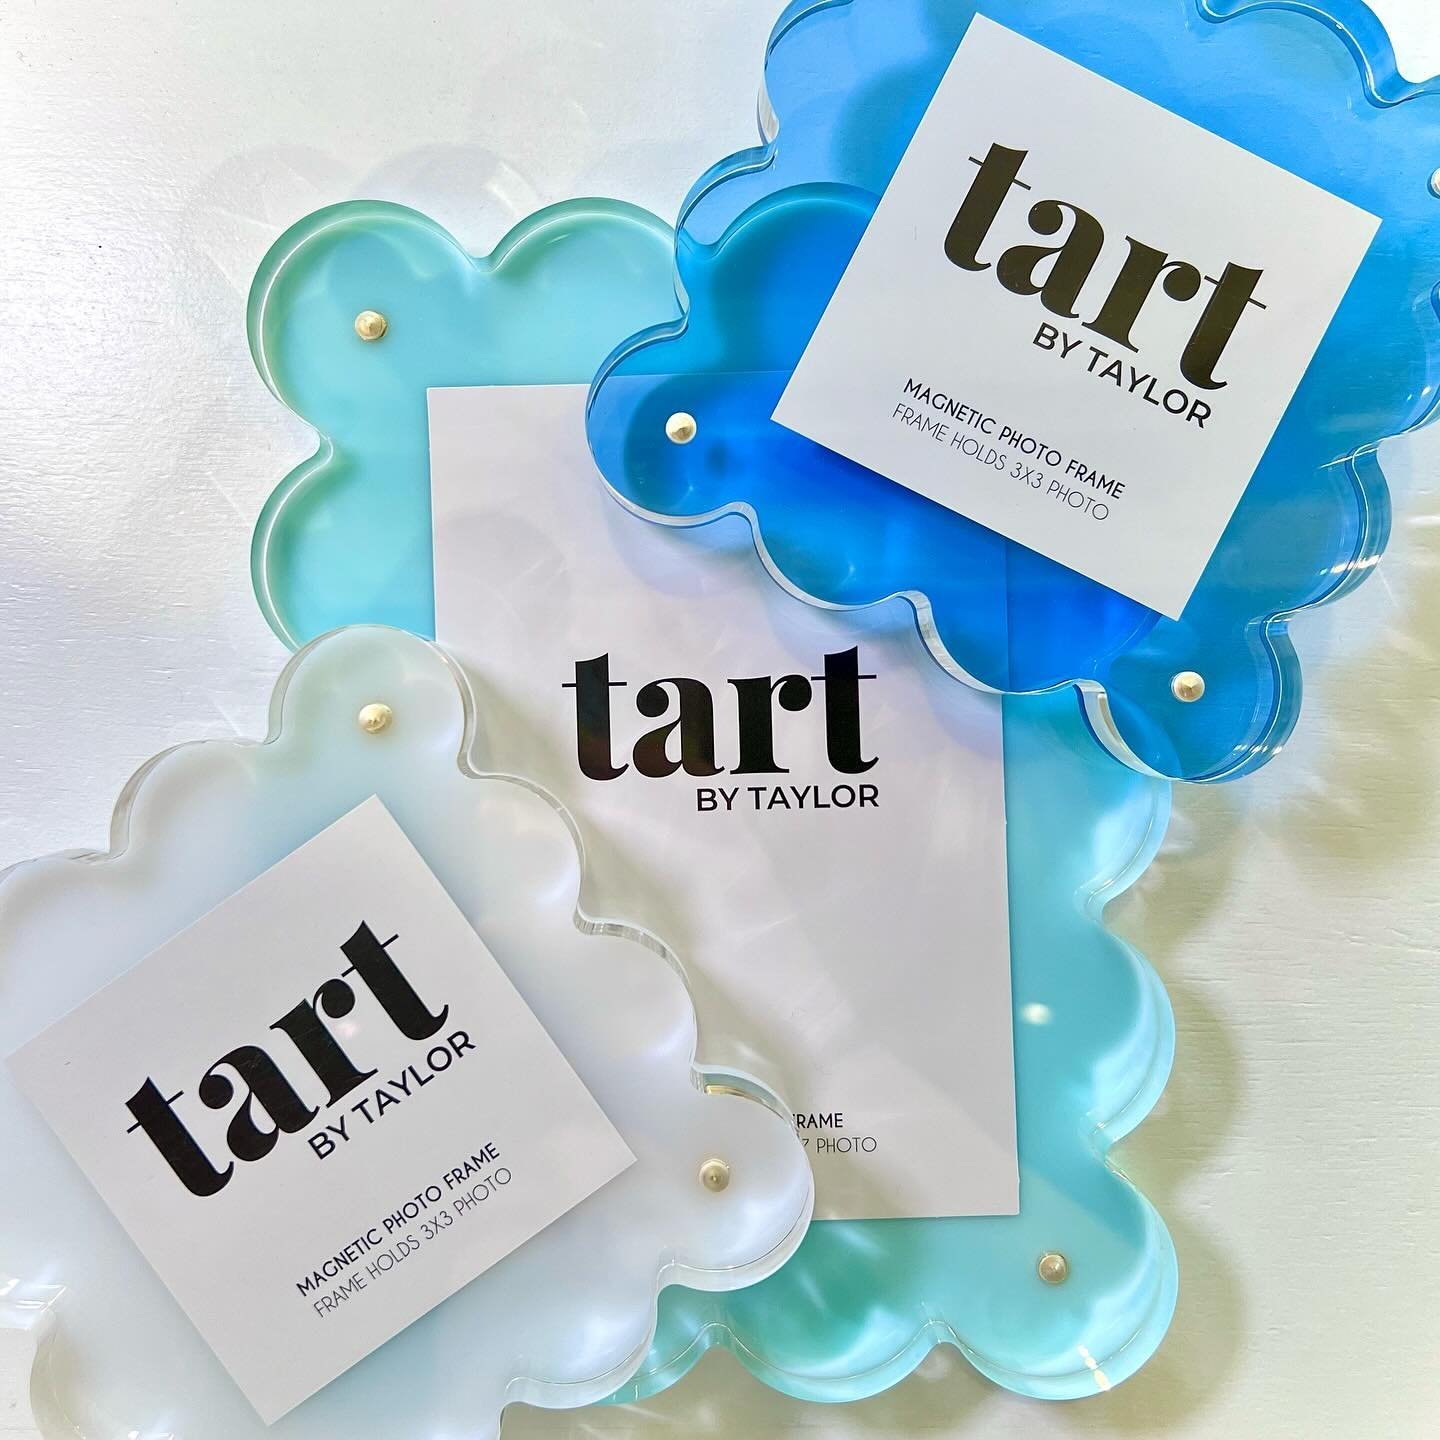 🌟NEW🌟 magnetic acrylic picture frames from @tart_bytaylor !!📸🩷 These funky frames are such an easy and fun way to bring unique color to your space! Shop them in-person in the gallery this week!🛍️ 
&bull;
&bull;
&bull;
#tartbytaylor #pictureframe